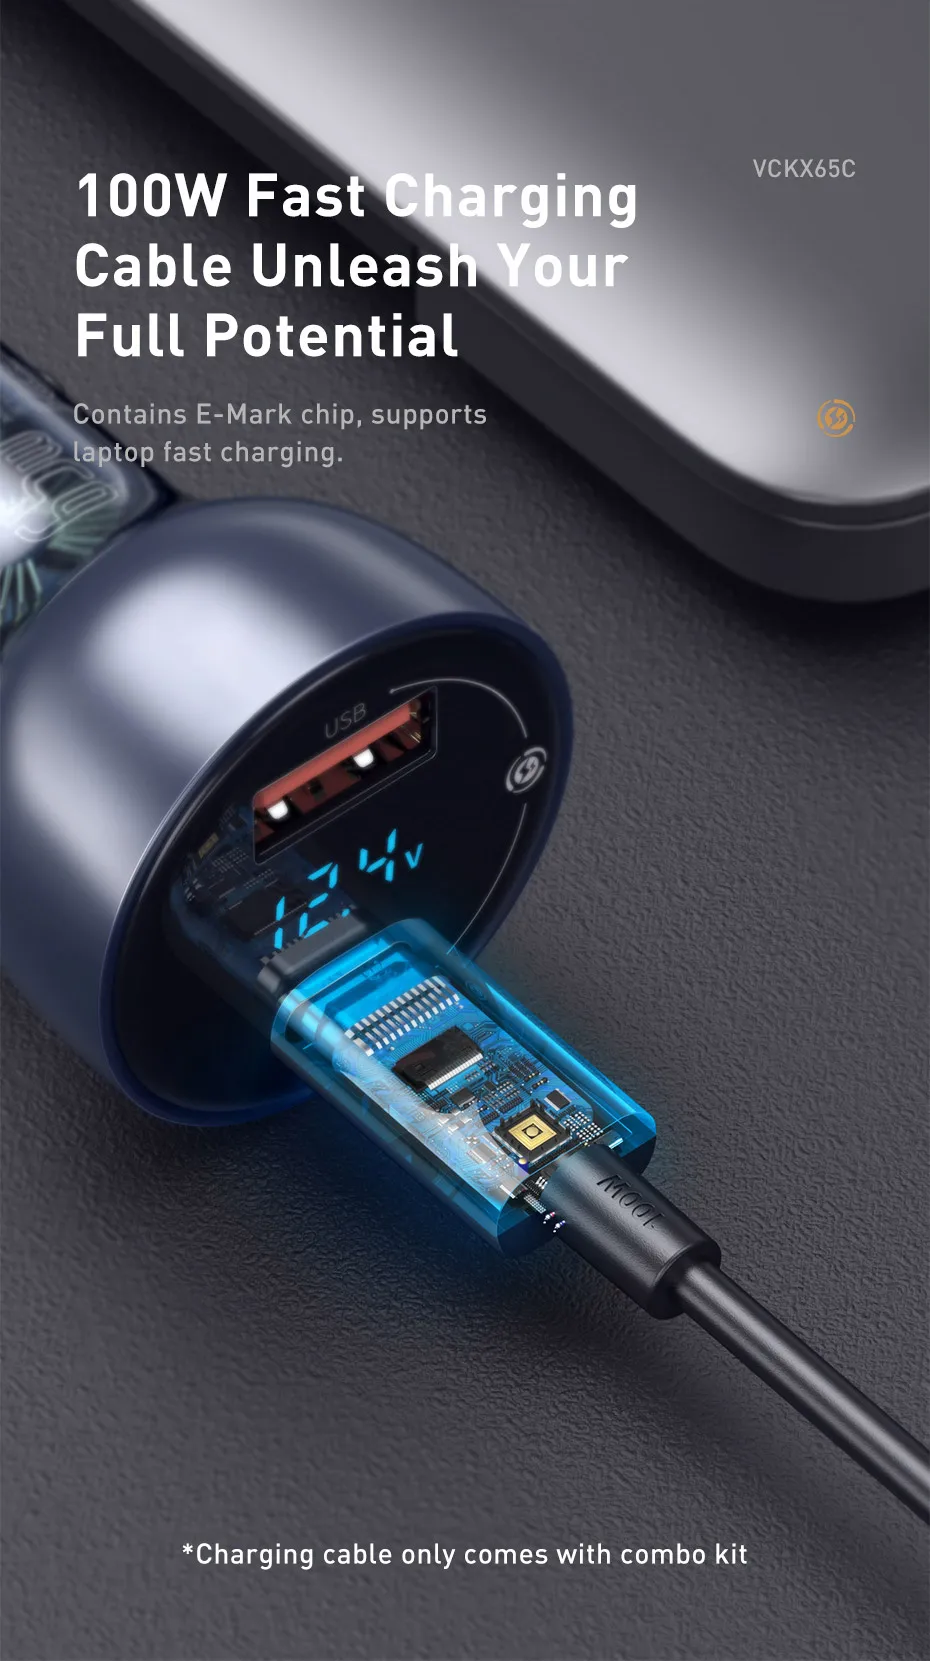 samsung super fast car charger Baseus 65W USB Car Charger Quick Charge 4.0 3.0 QC4.0 QC3.0 Type C PD Fast Car Charging Charger For iPhone Xiaomi Mobile Phone usb c for car